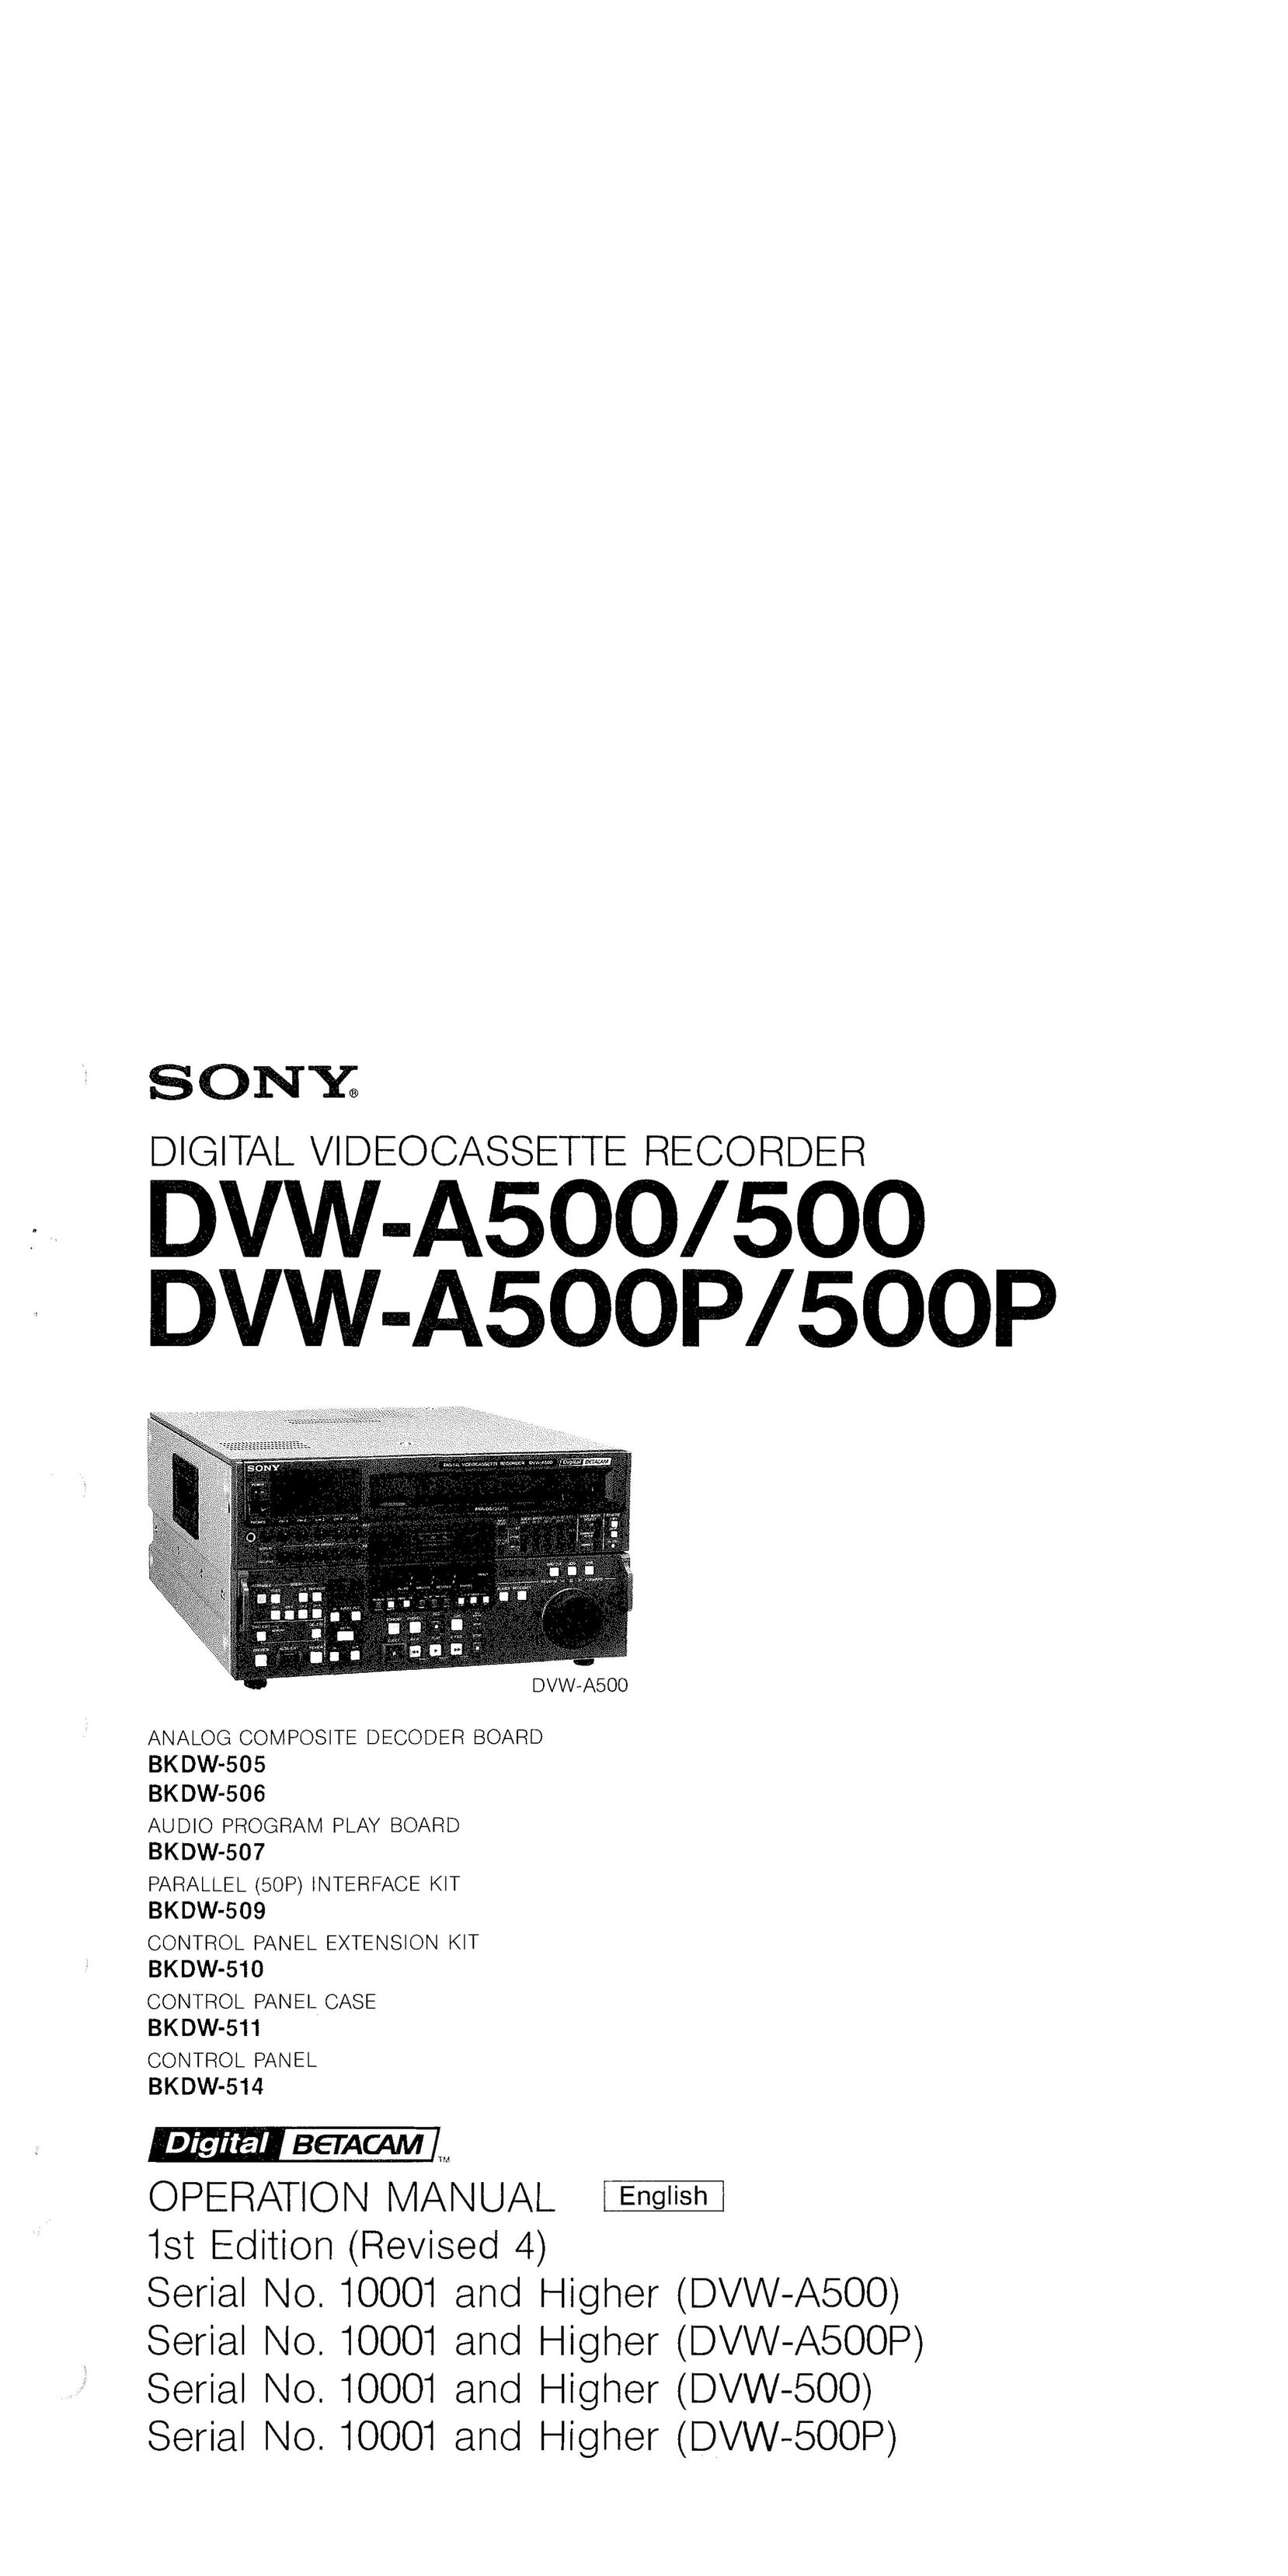 Sony 500 DVW-A500P VCR User Manual